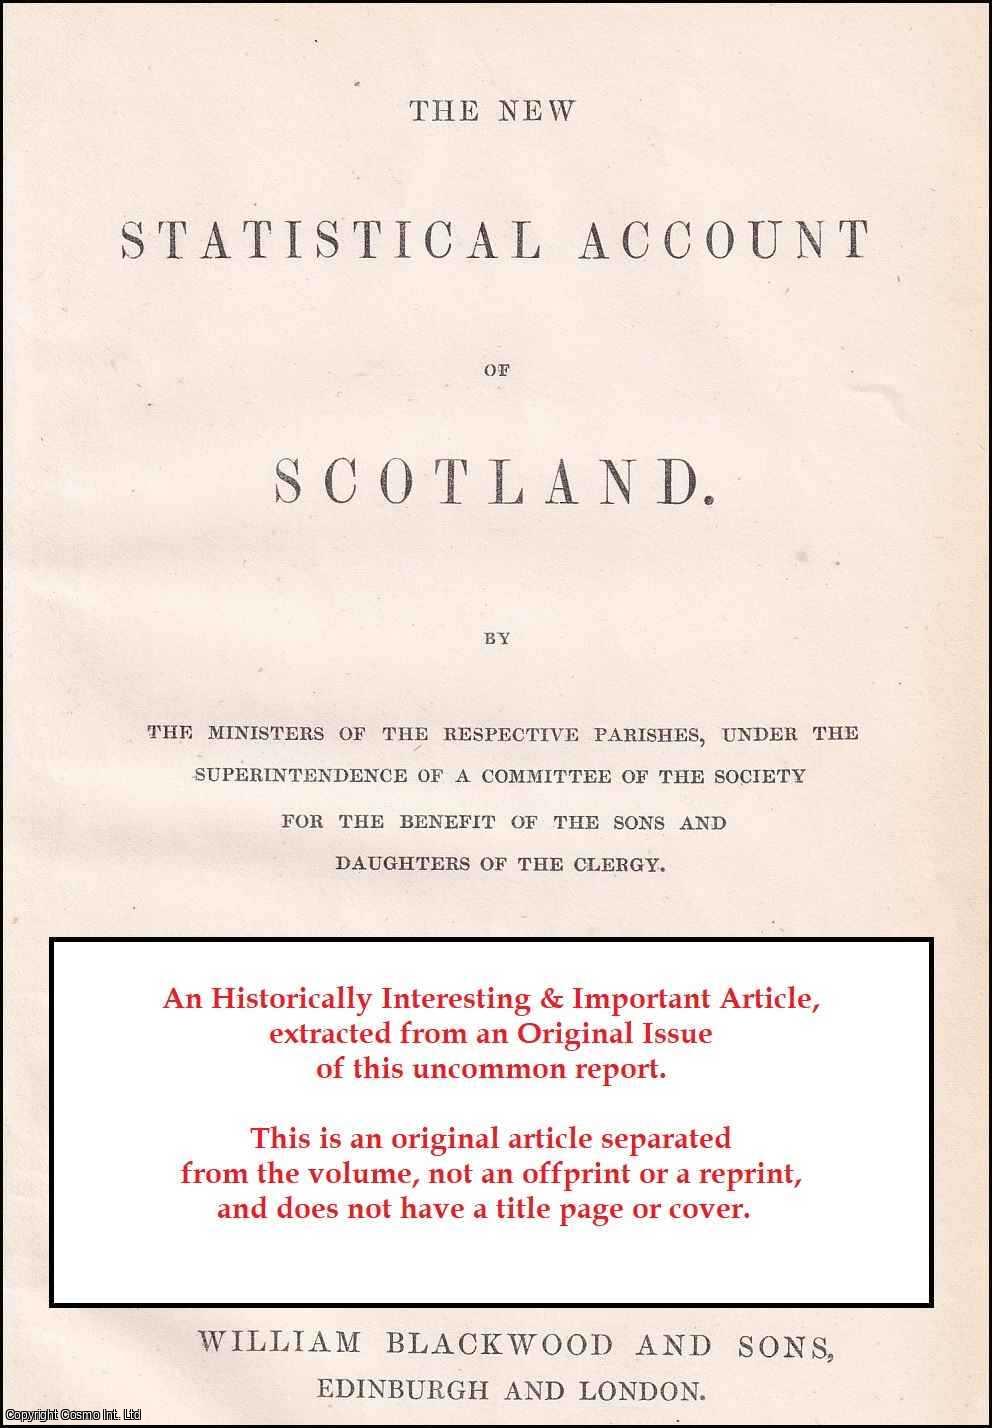 Rev. Peter Balfour - Parish of Clackmannan. Presbytery of Stirling, Synod of Perth and Stirling. An uncommon original article from The New Statistical Account of Scotland, 1845.